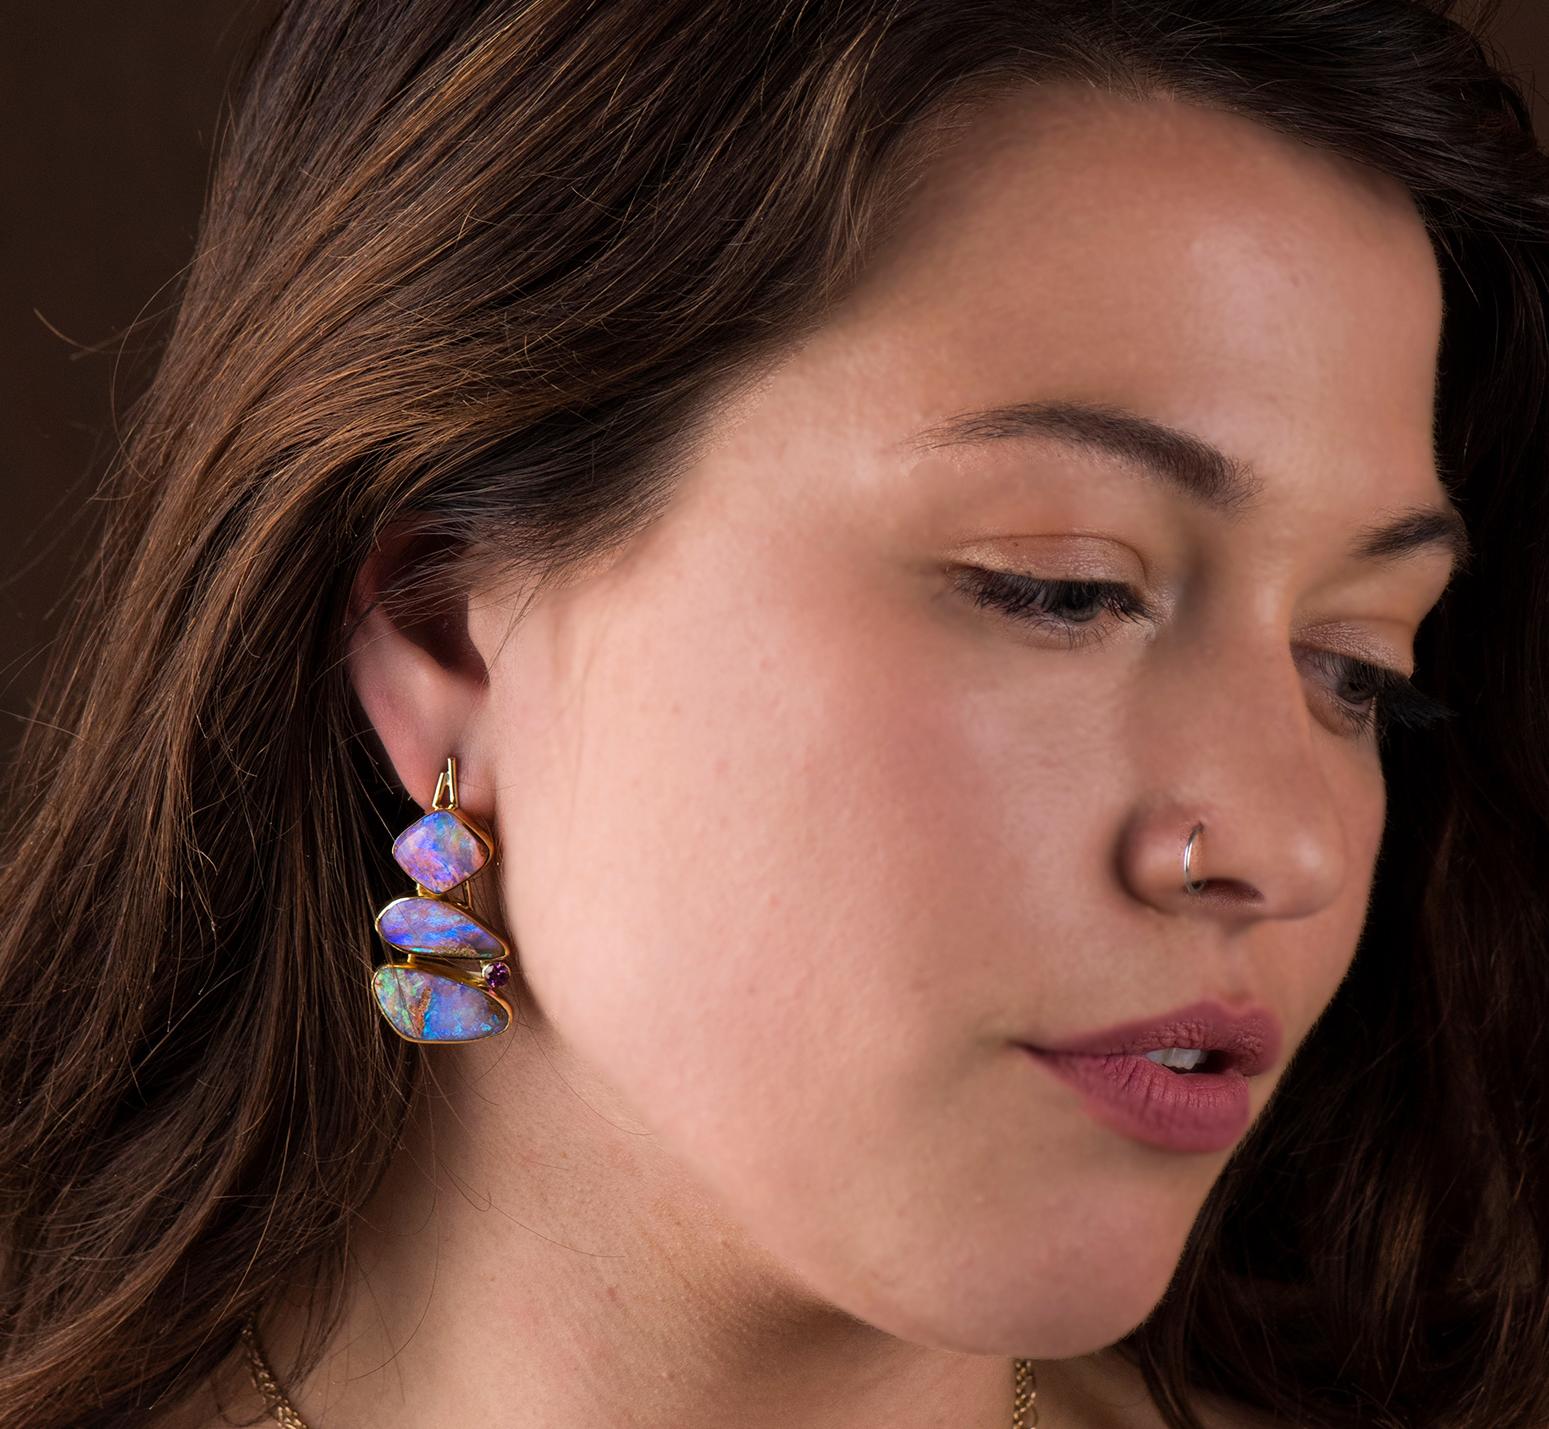 Opal is found in many type of matrix's.  These earrings are opal in petrified wood!  Amazing really.  The color and depth of the opal is lovely, framed in high carat 22k gold with 18k gold accents.  The grape garnet pulls a bit of the purple out of